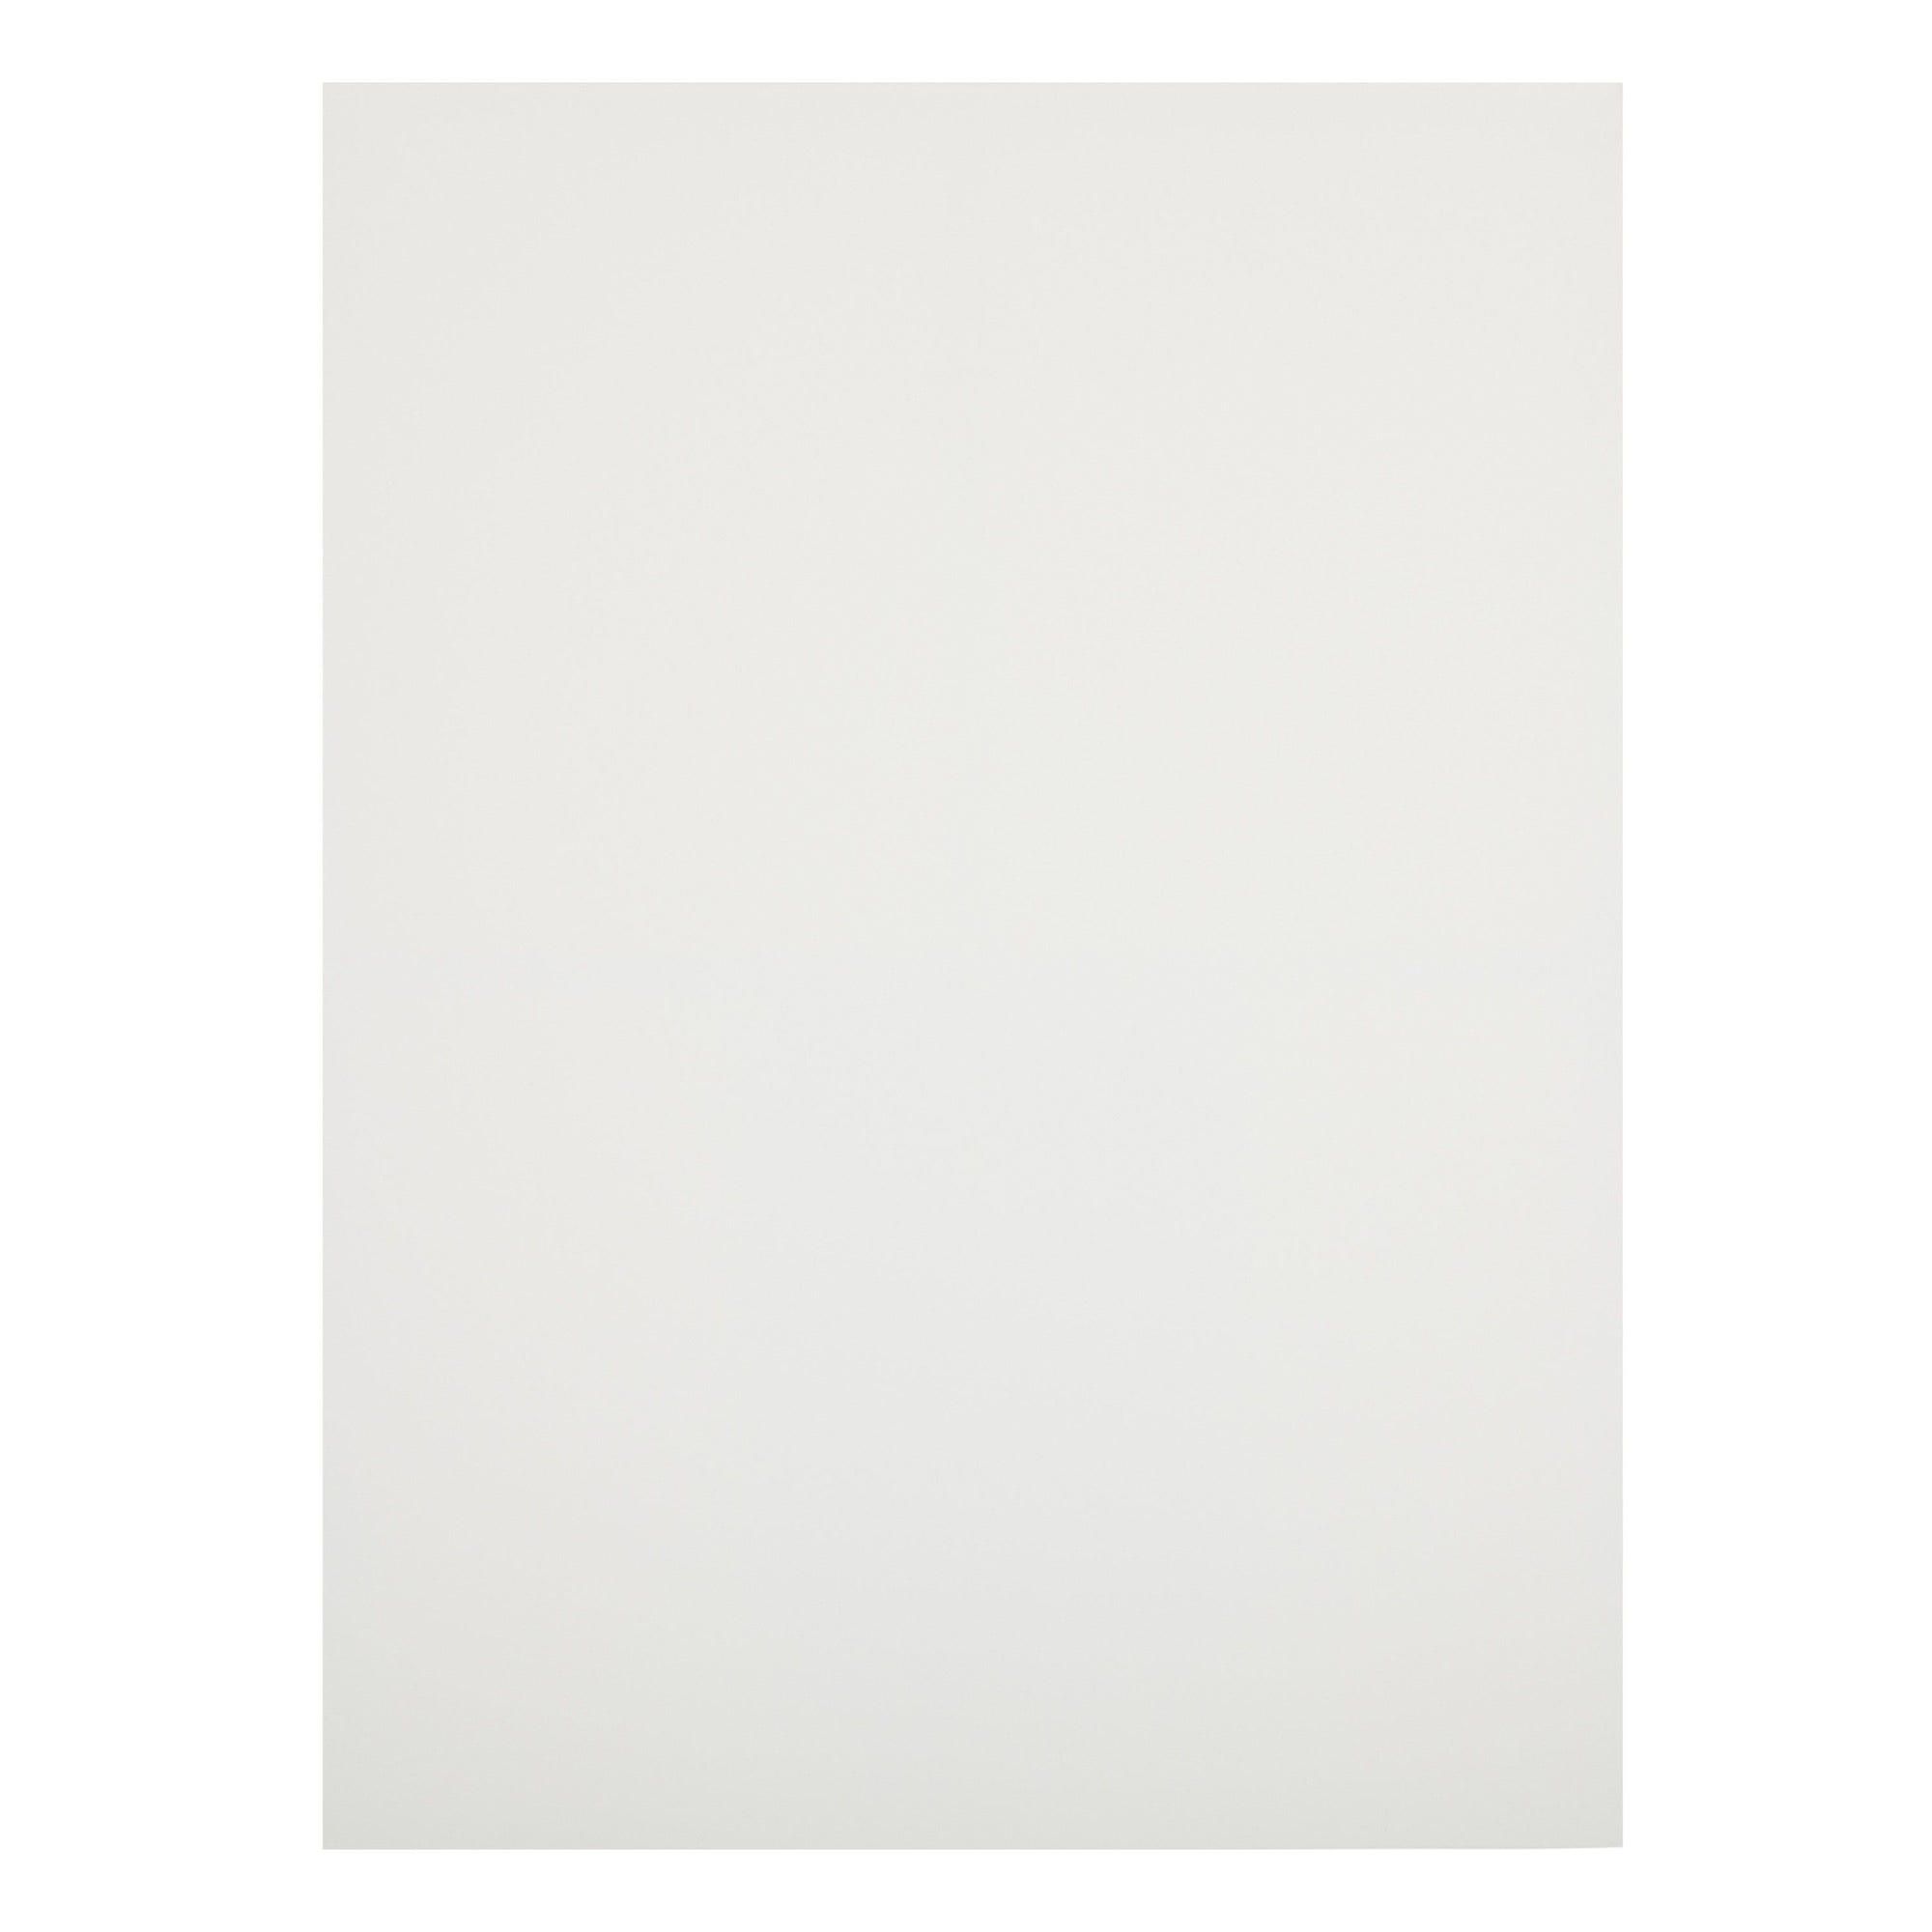 Stretched White 30x40 Canvas Boards for Painting for Artists